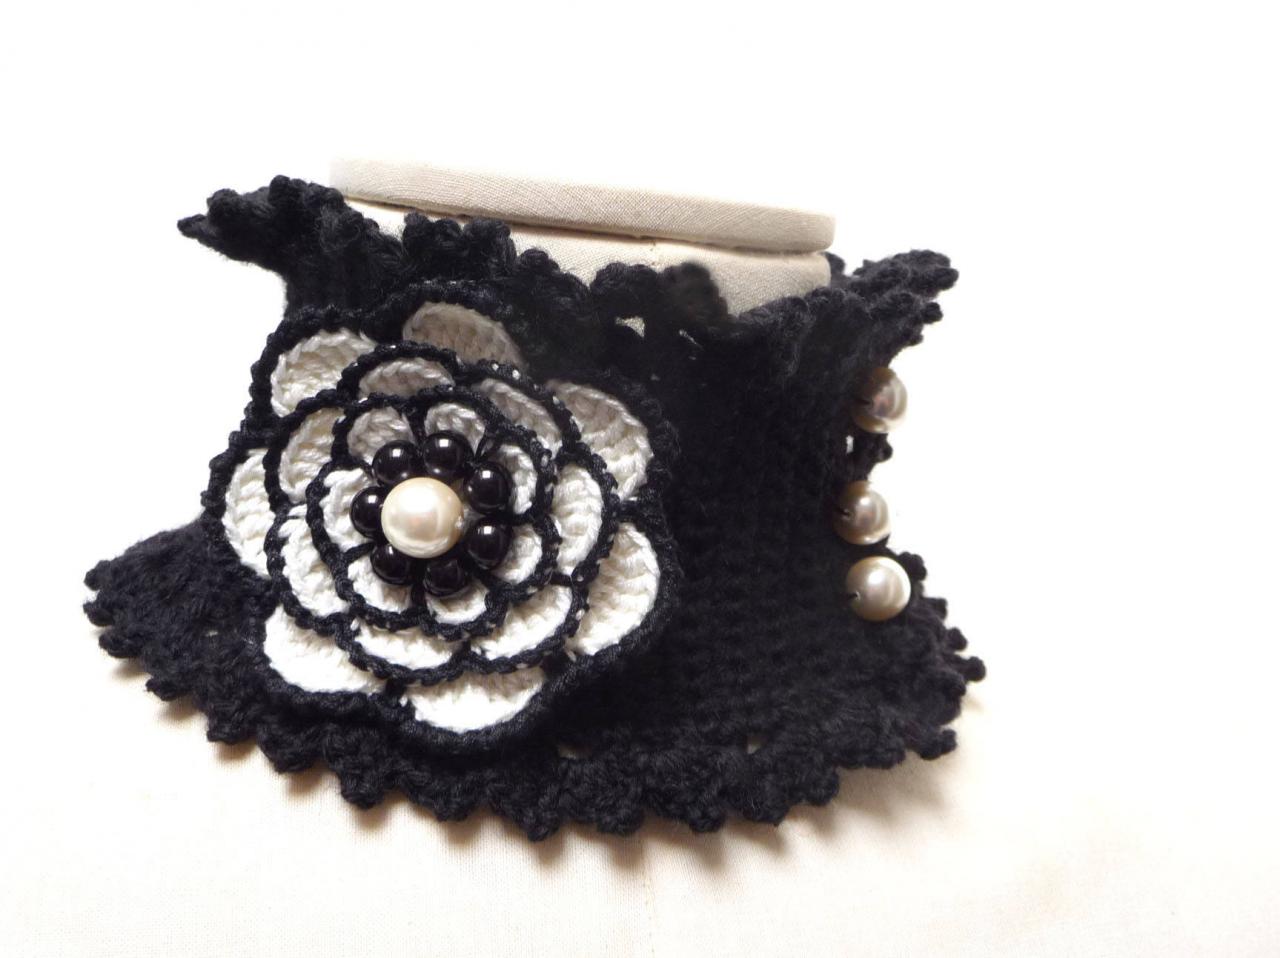 Crocheted Black And White Neckwarmer / Necklace With Big Flower And Glass Pearls - Lux Cowl Choker - Big Flower